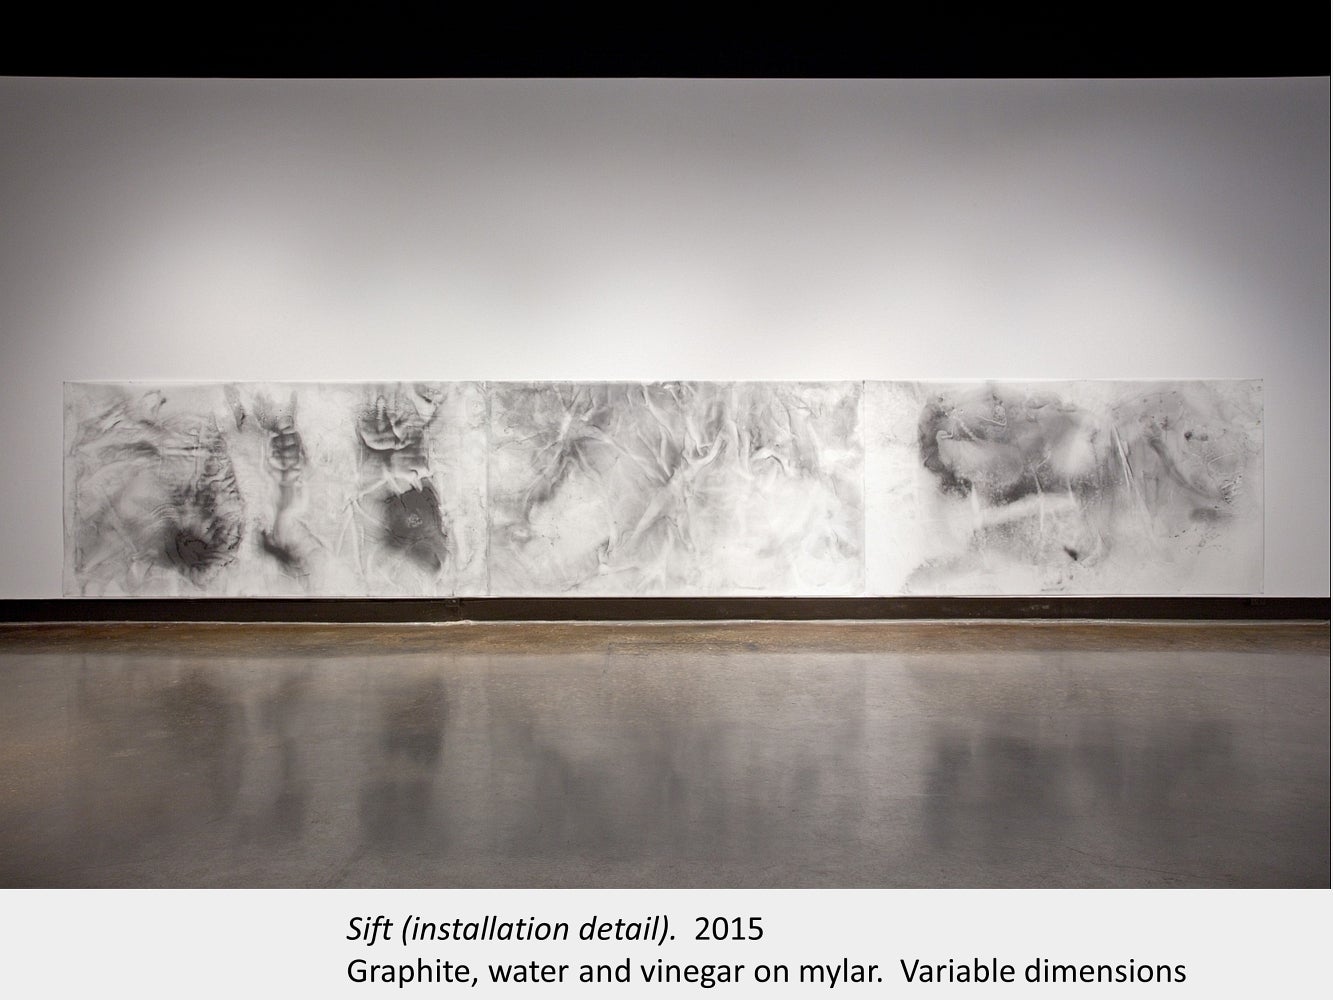 Artwork by Sarah Kernohan. Sift (installation view). 2015. Graphite, water and vinegar on mylar. Variable dimensions.